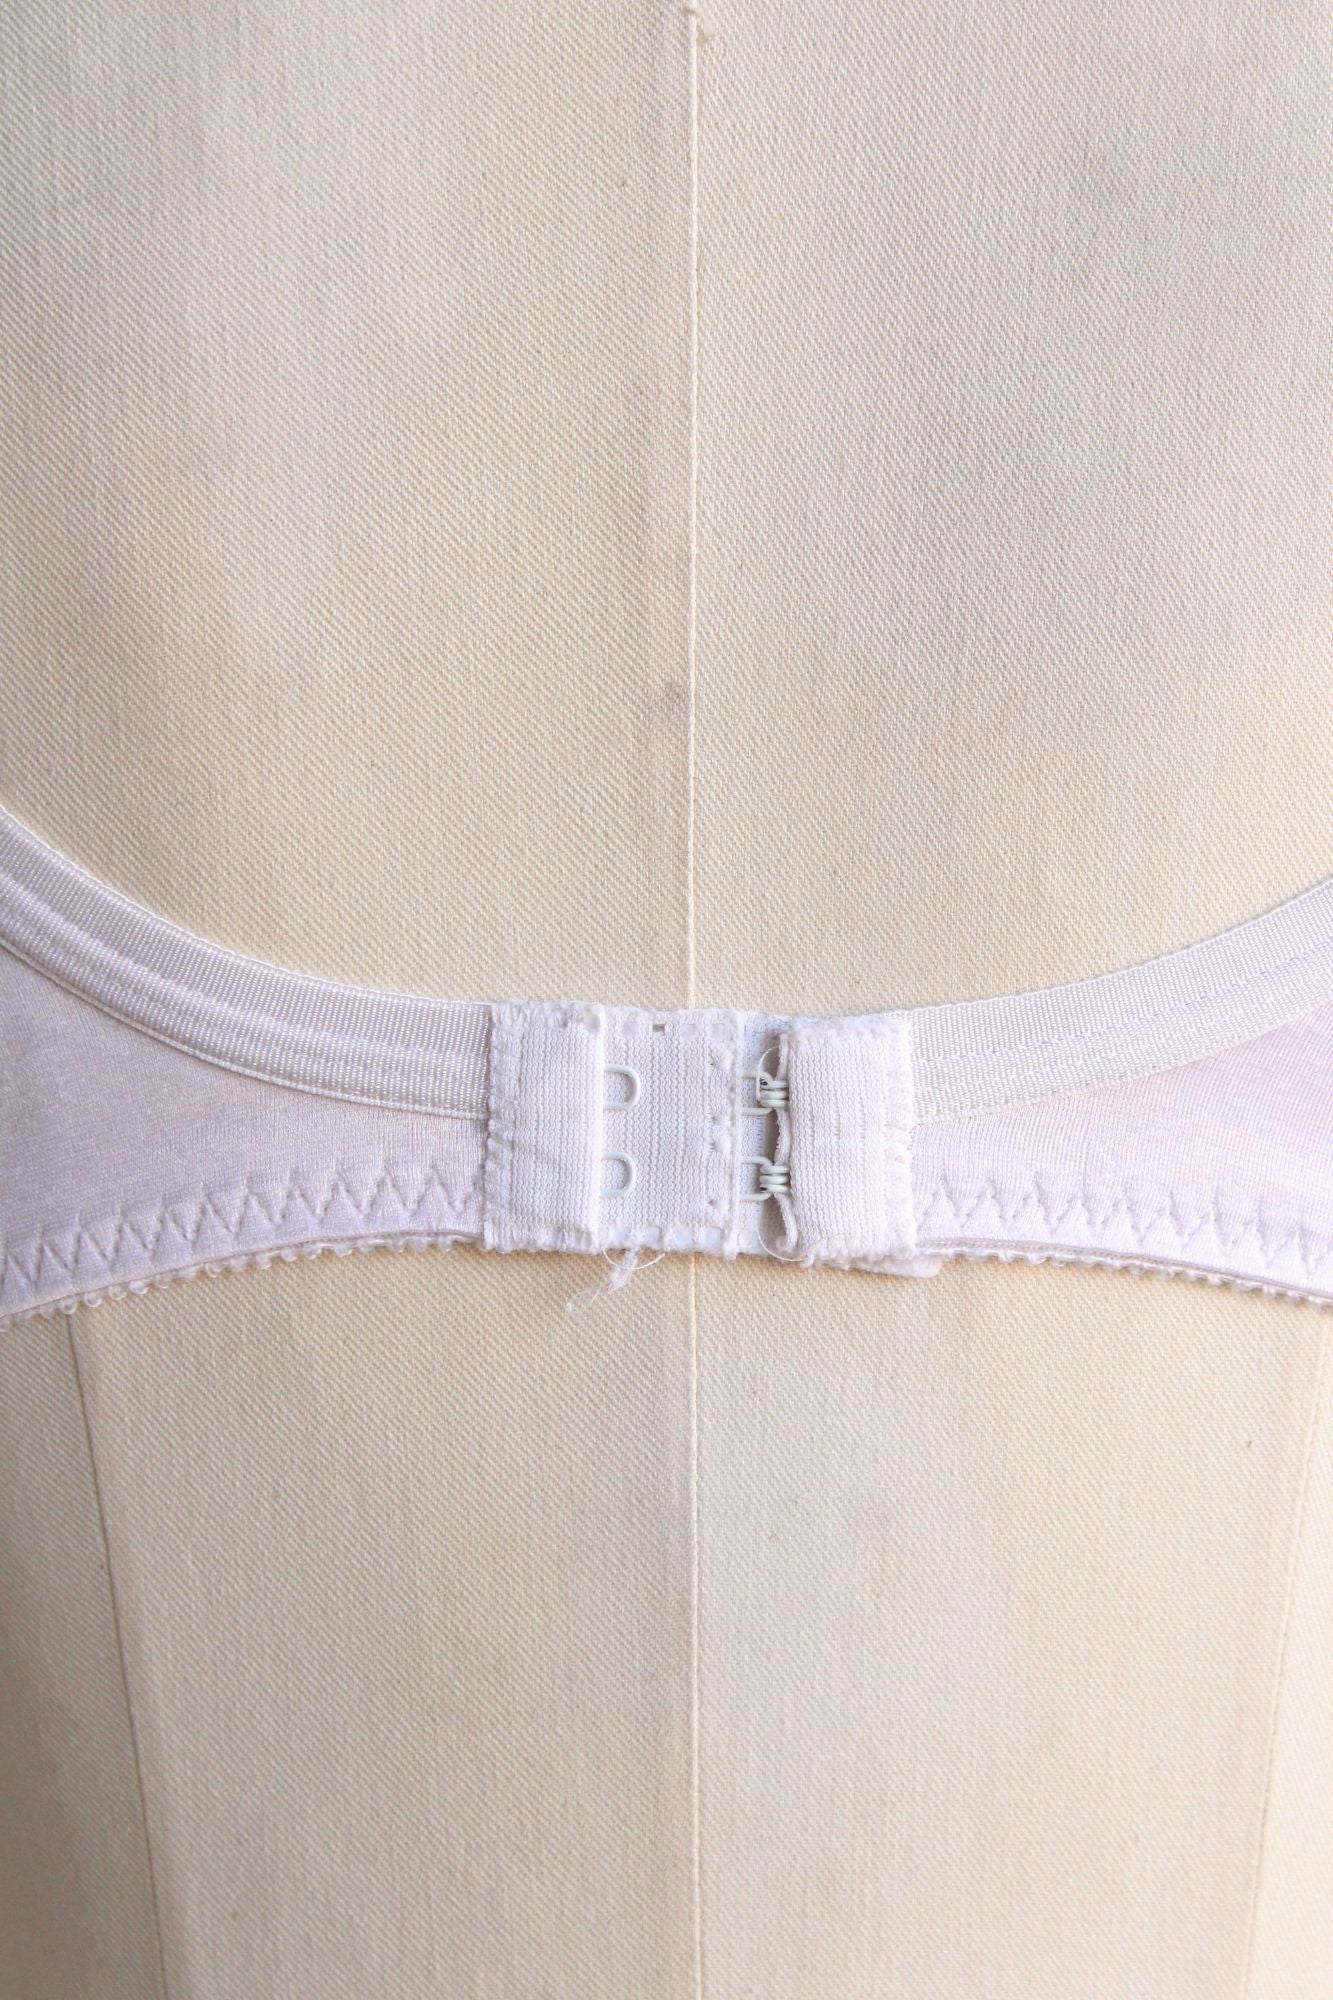 Vintage 1980s 1990s Bra, White 36B, Warners Lace Charmers, No Underwire,  Pin up Lingerie -  UK